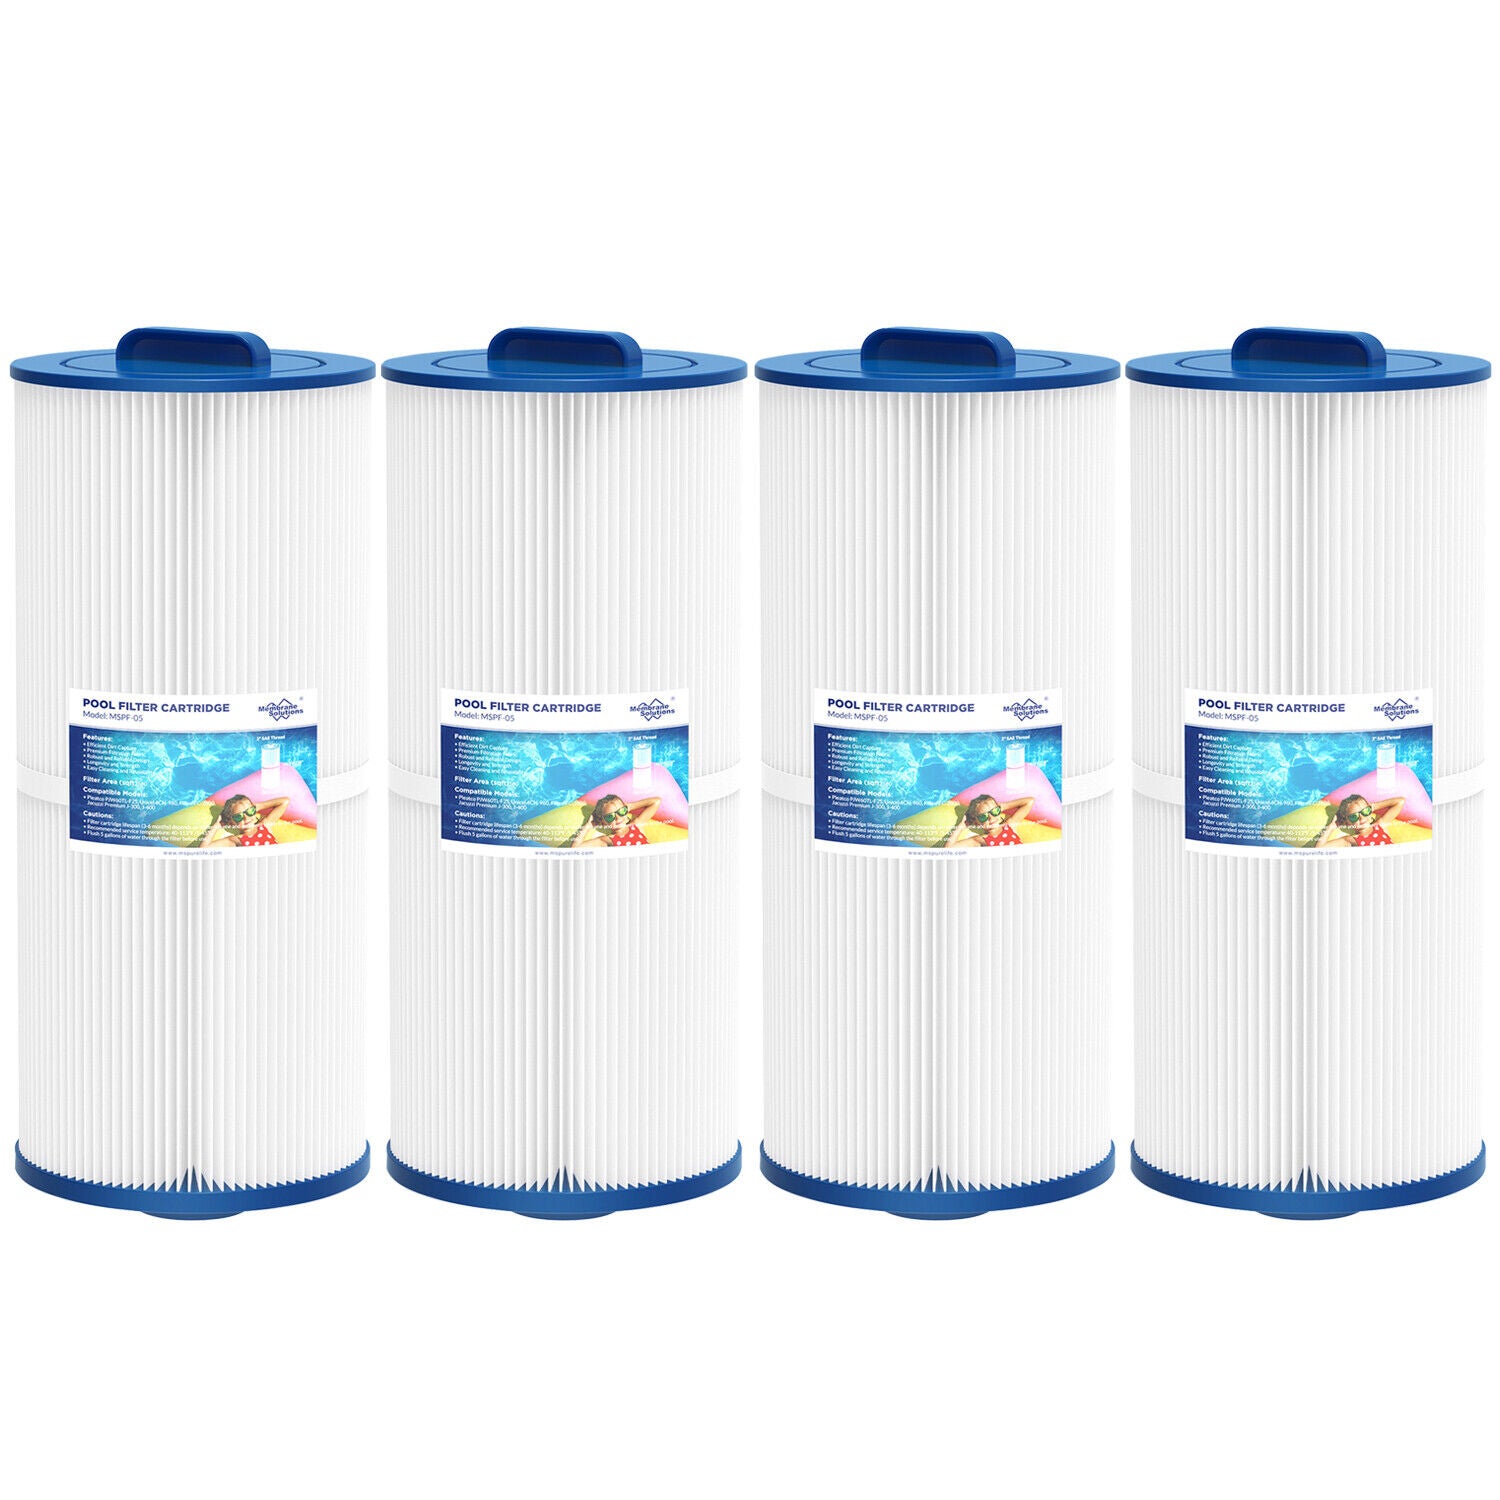 Membrane Solutions F5 Large Pool Filter Cartridge Replacement for PJW60TL-F2S Jacuzzi J300 J400